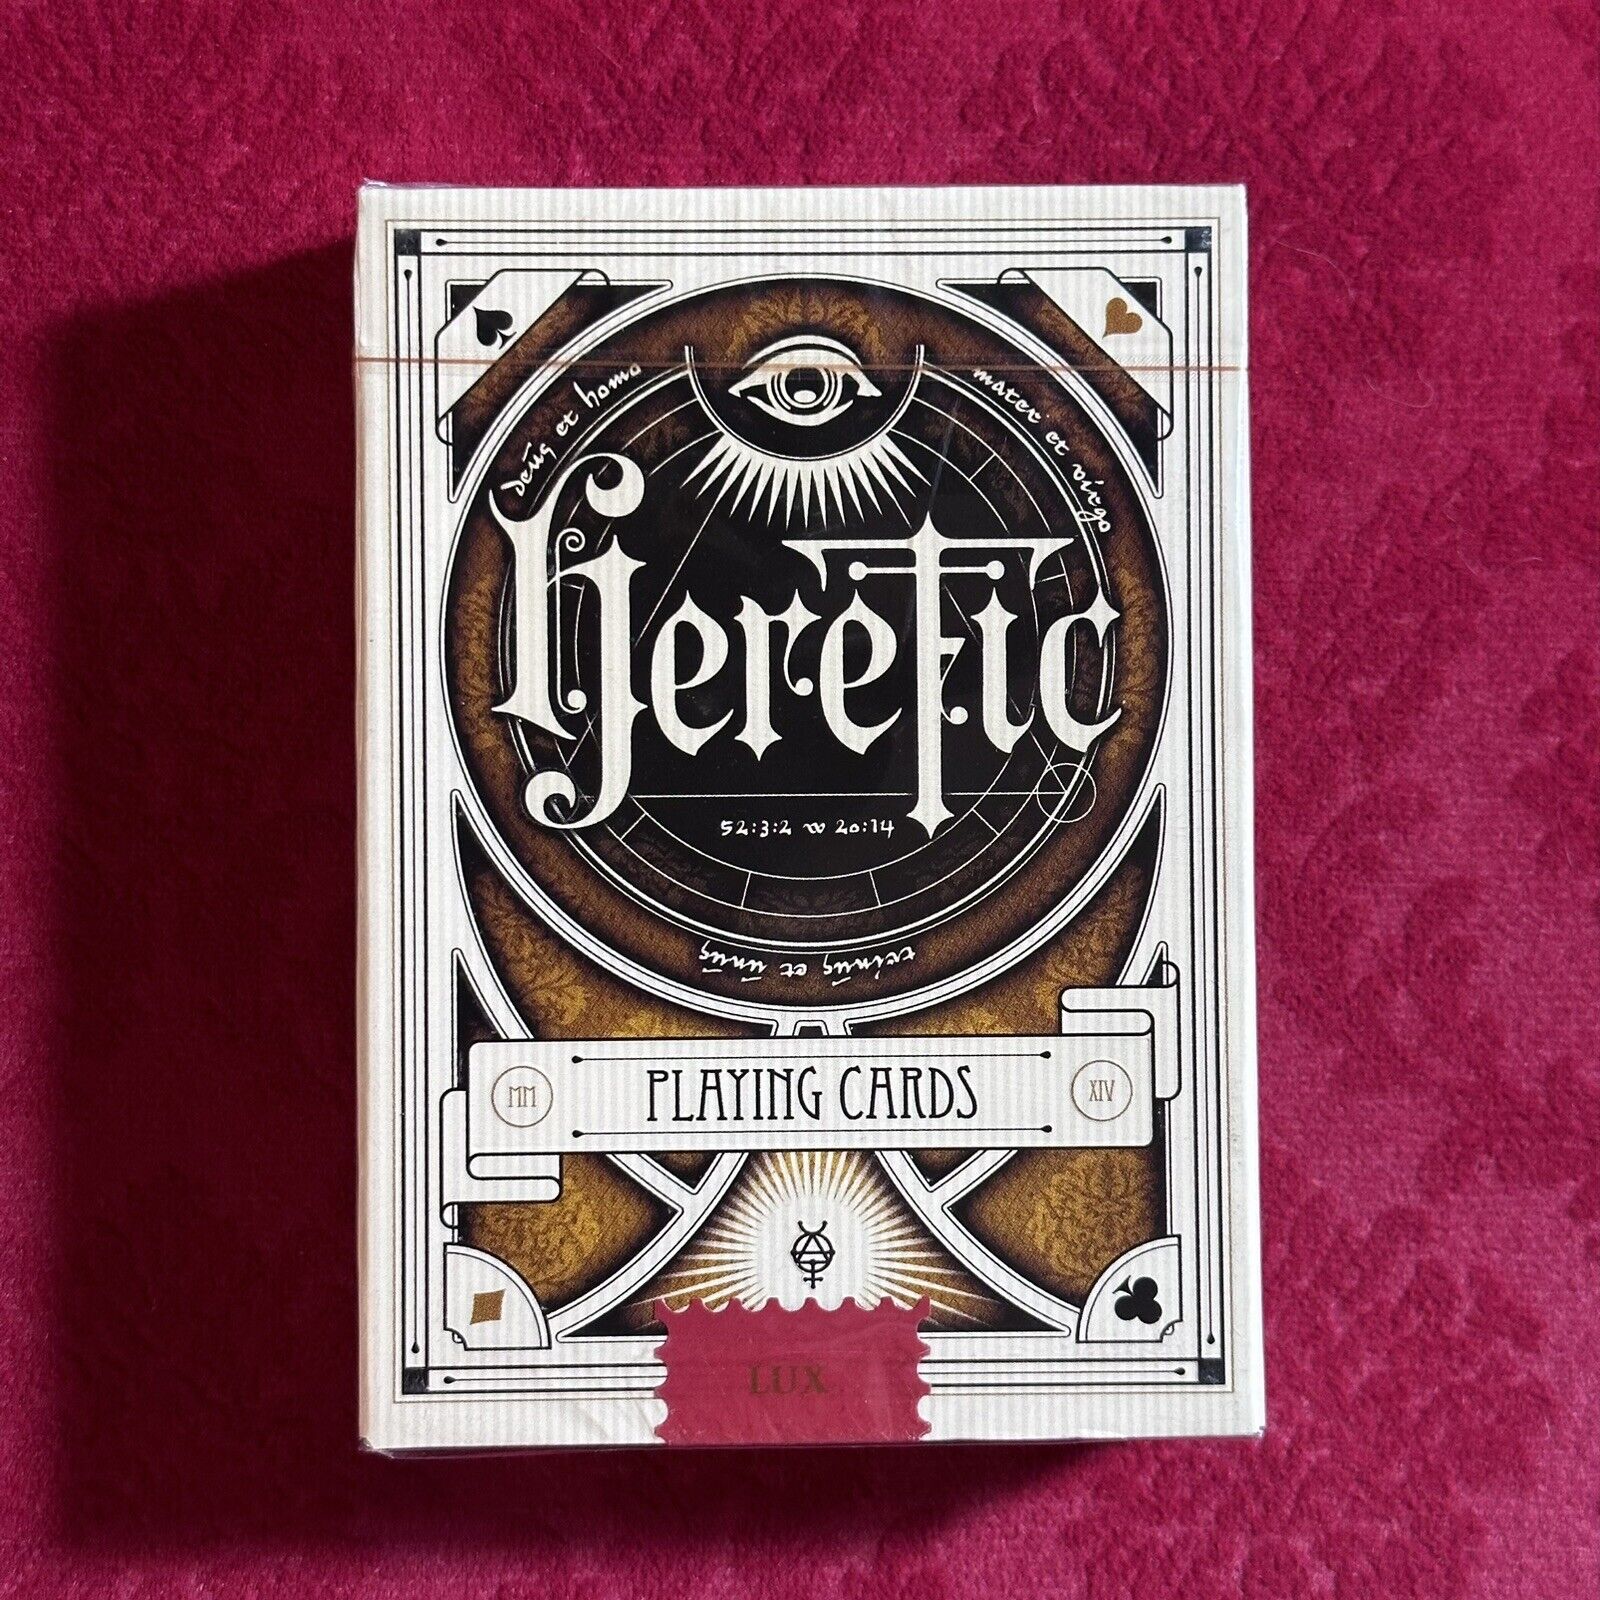 Heretic Lux 2014 Edition Playing Cards by Stockholm 17 2320 Of 4400